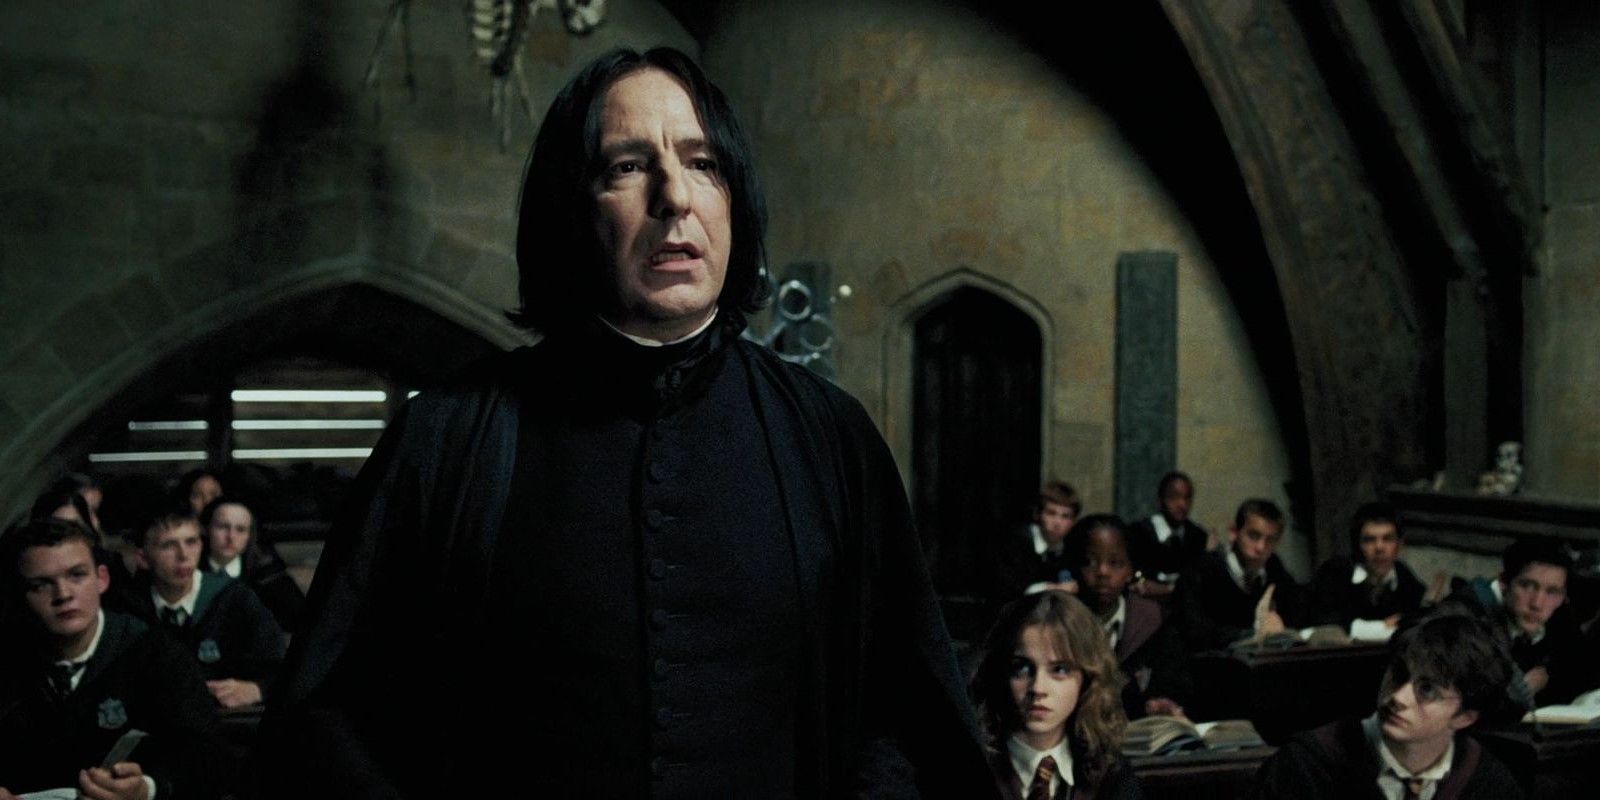 Snape at class in Harry Potter and the Prisoner of Azkaban